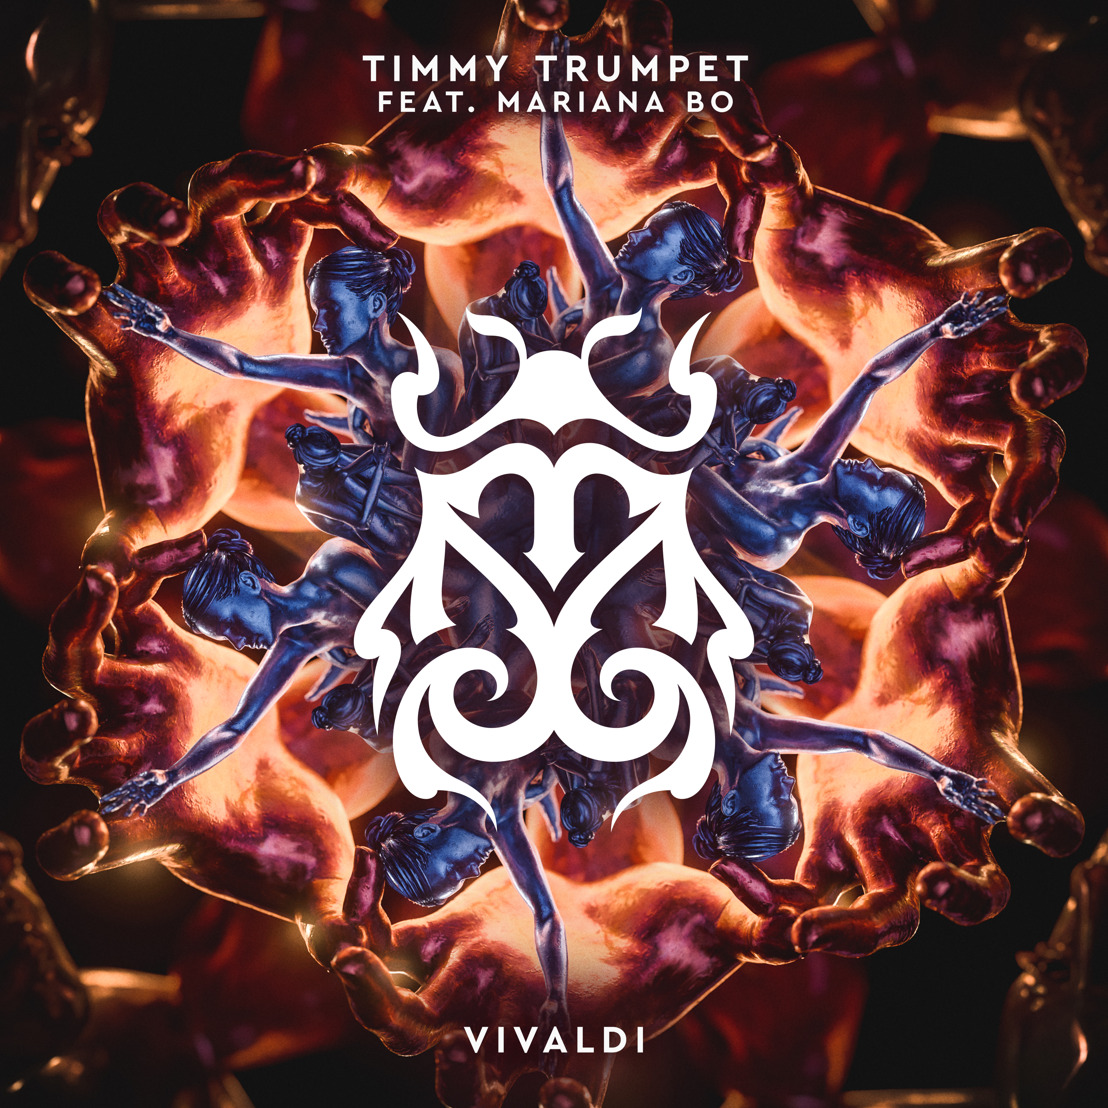 Australian crowd favorite Timmy Trumpet and Mexican-born violinist Mariana BO join forces for ‘Vivaldi’